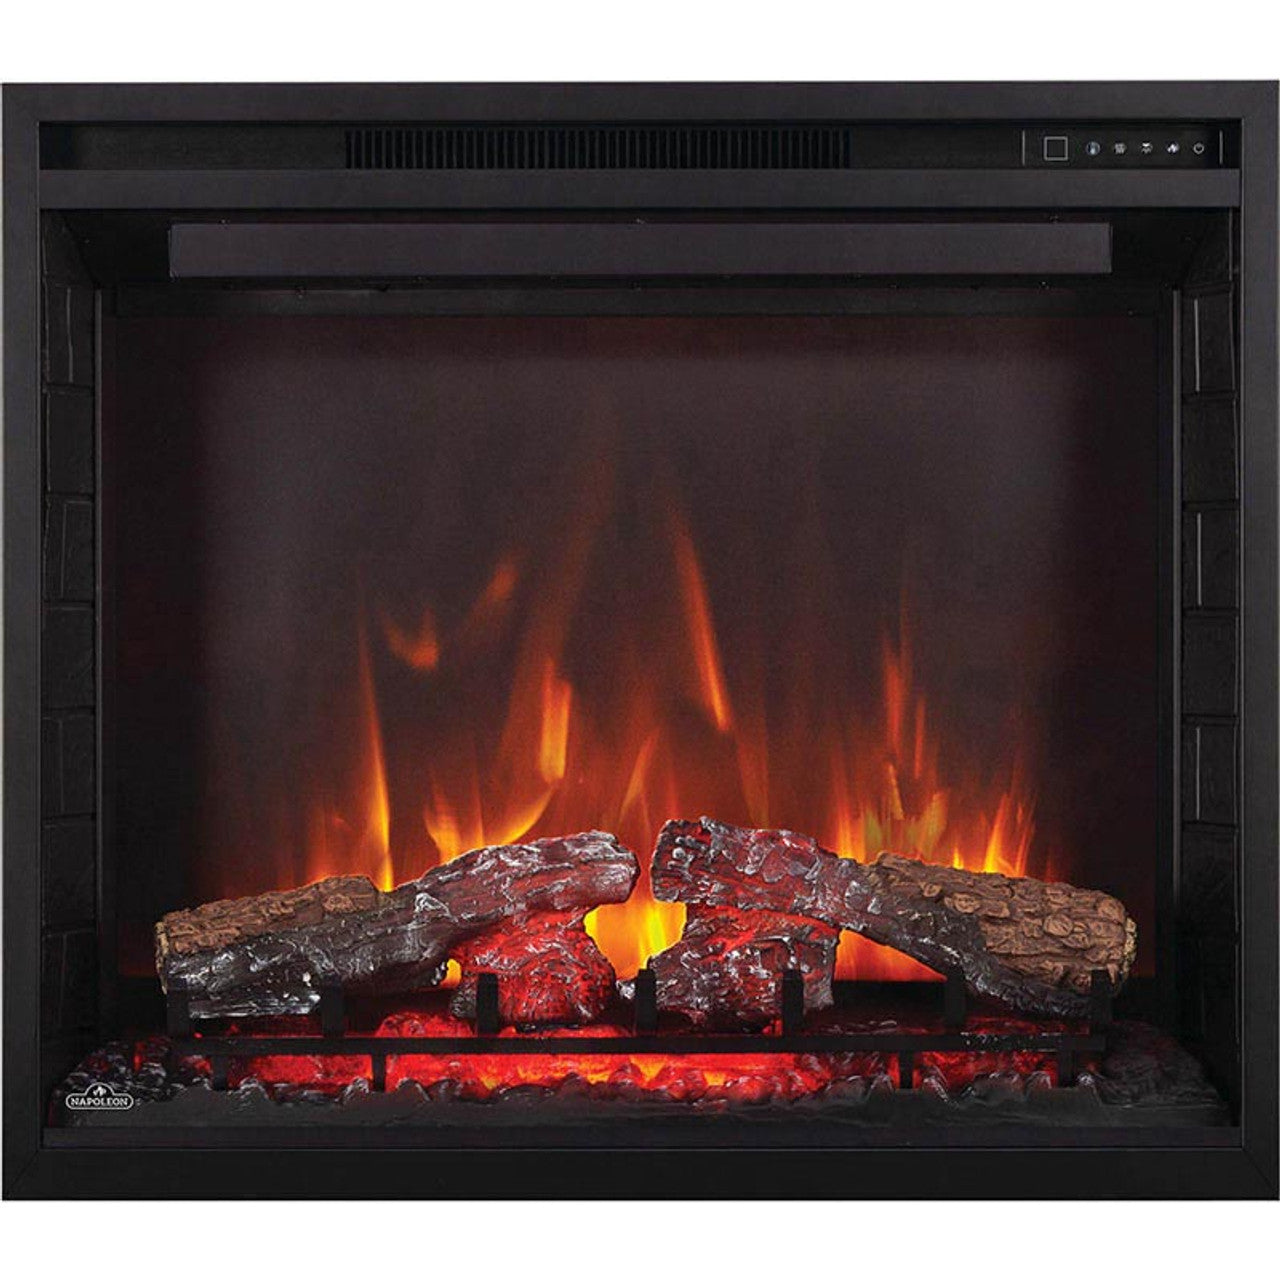 Napoleon Element 36 Self-Trimming Built-in Electric Fireplace - NEFB36H-BS-1 - Chimney Cricket